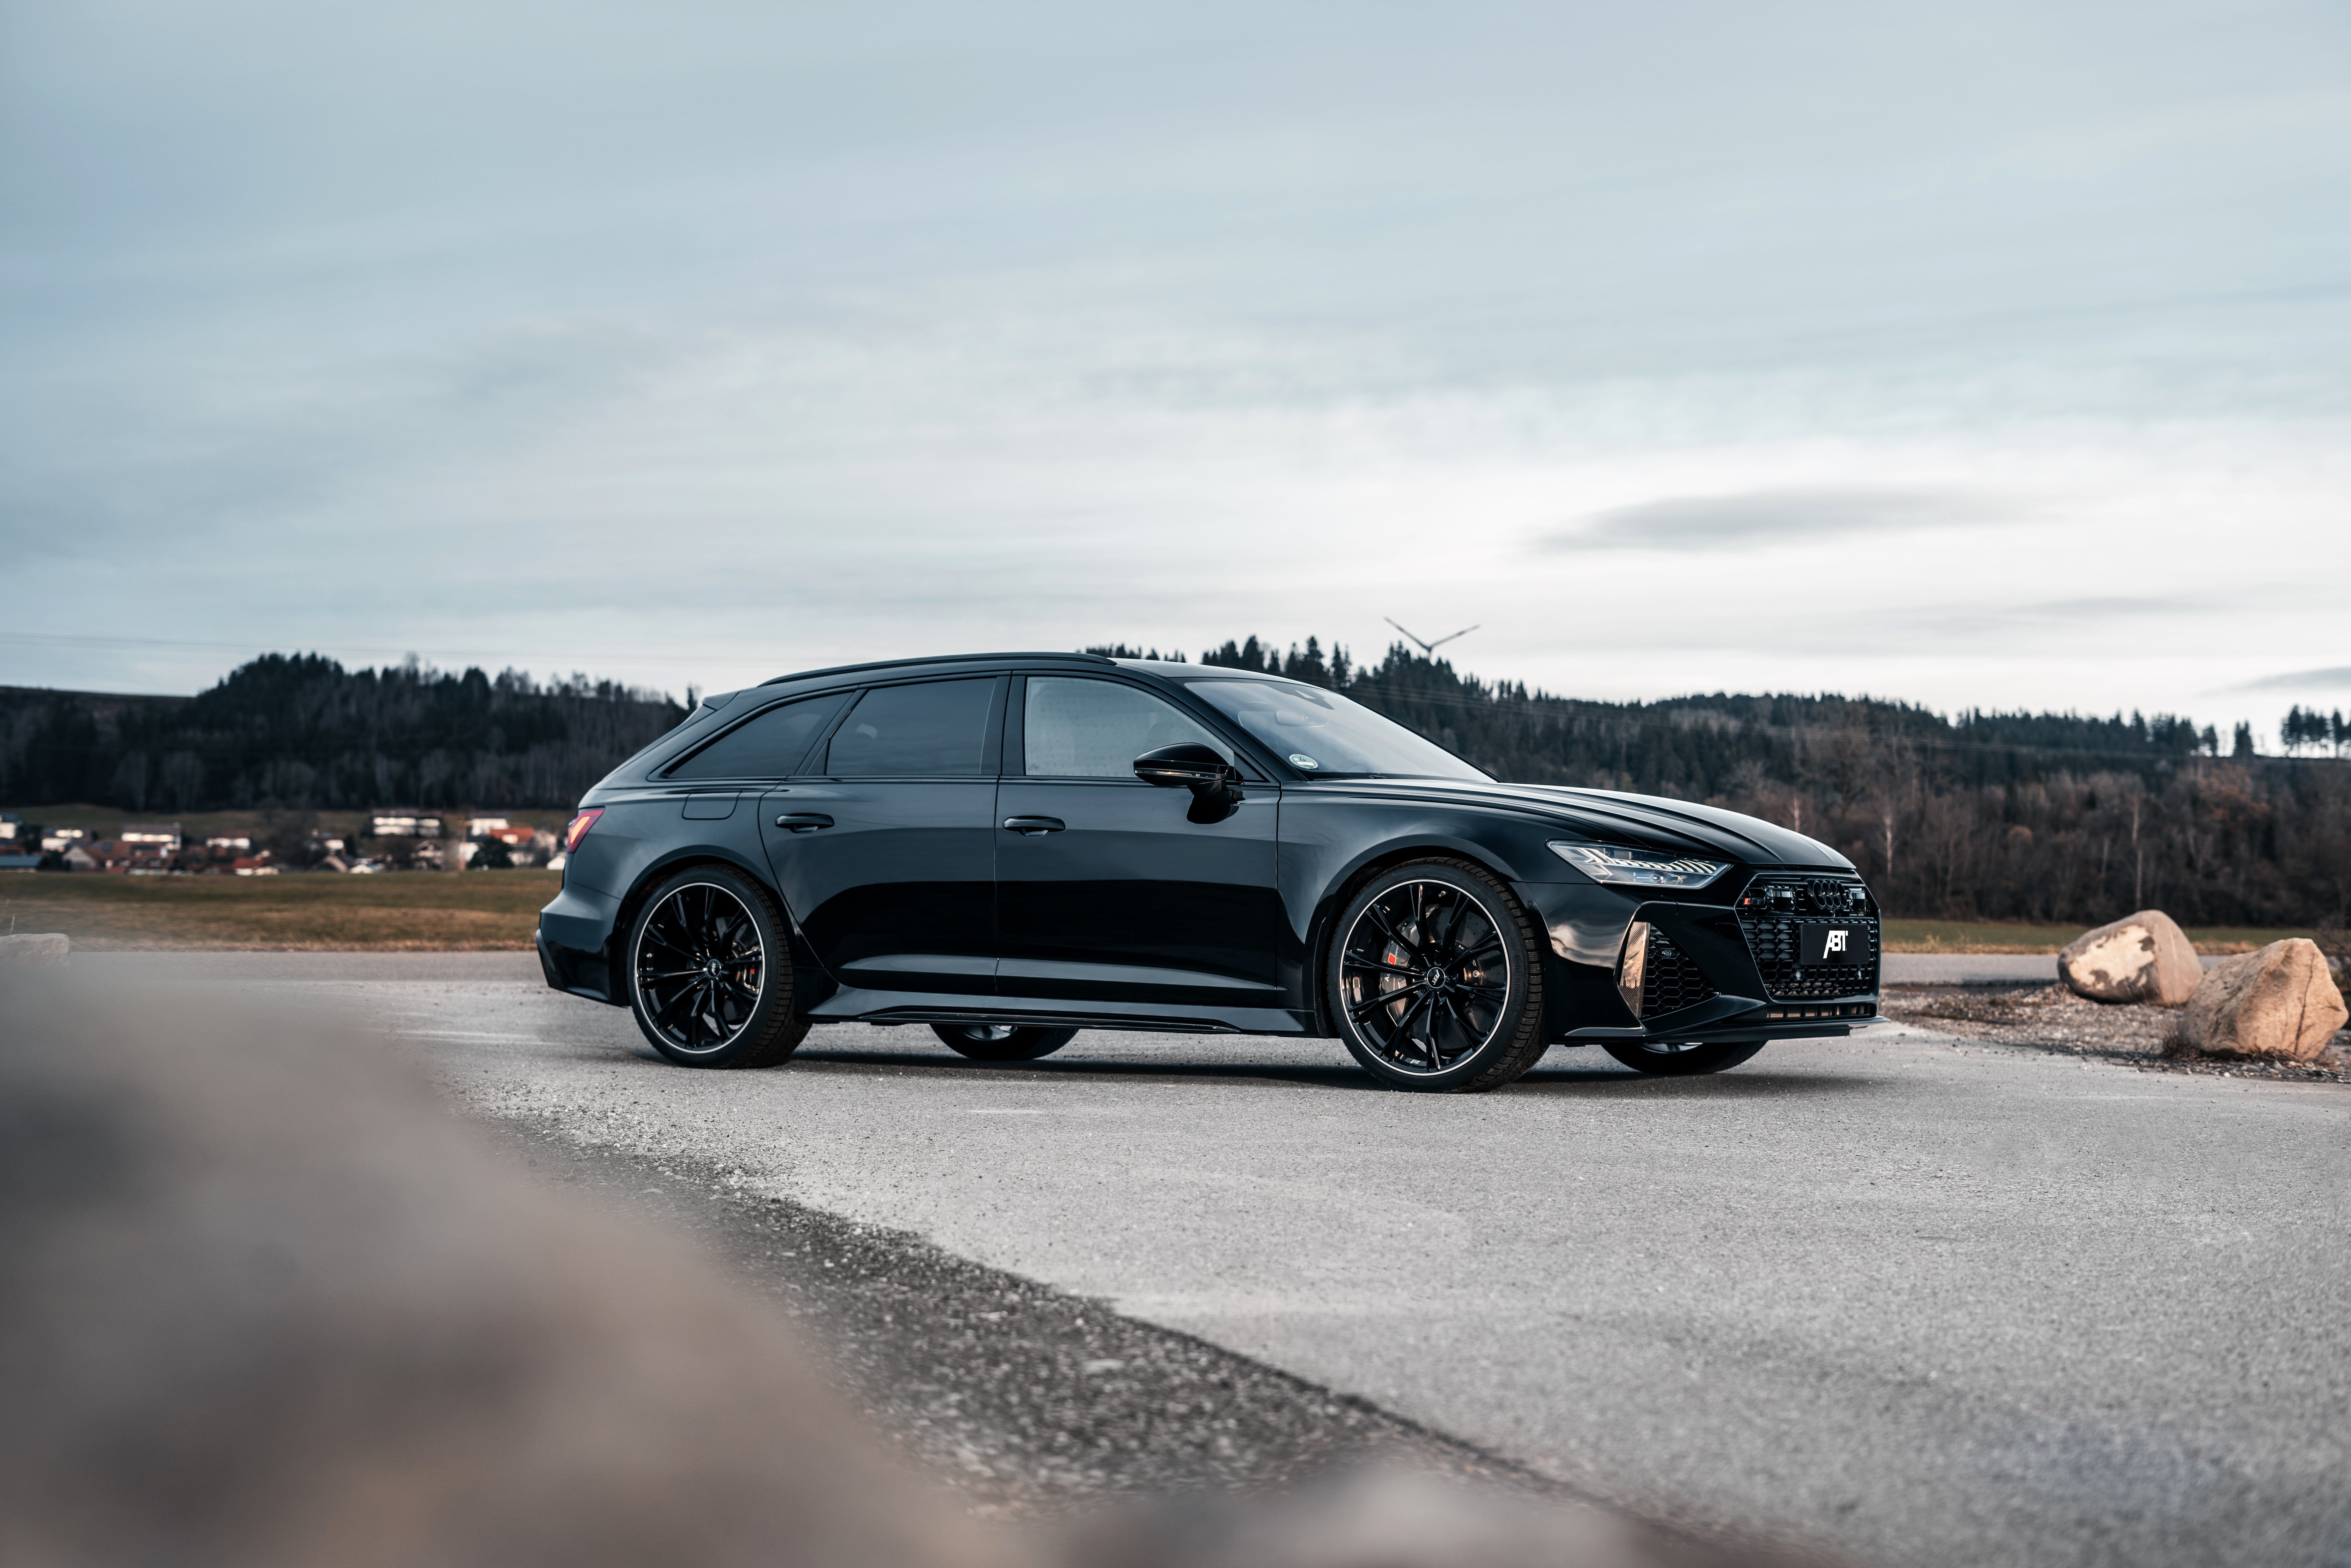 Audi, black, side view, ABBOT, universal, RS 6, 2020, 2019